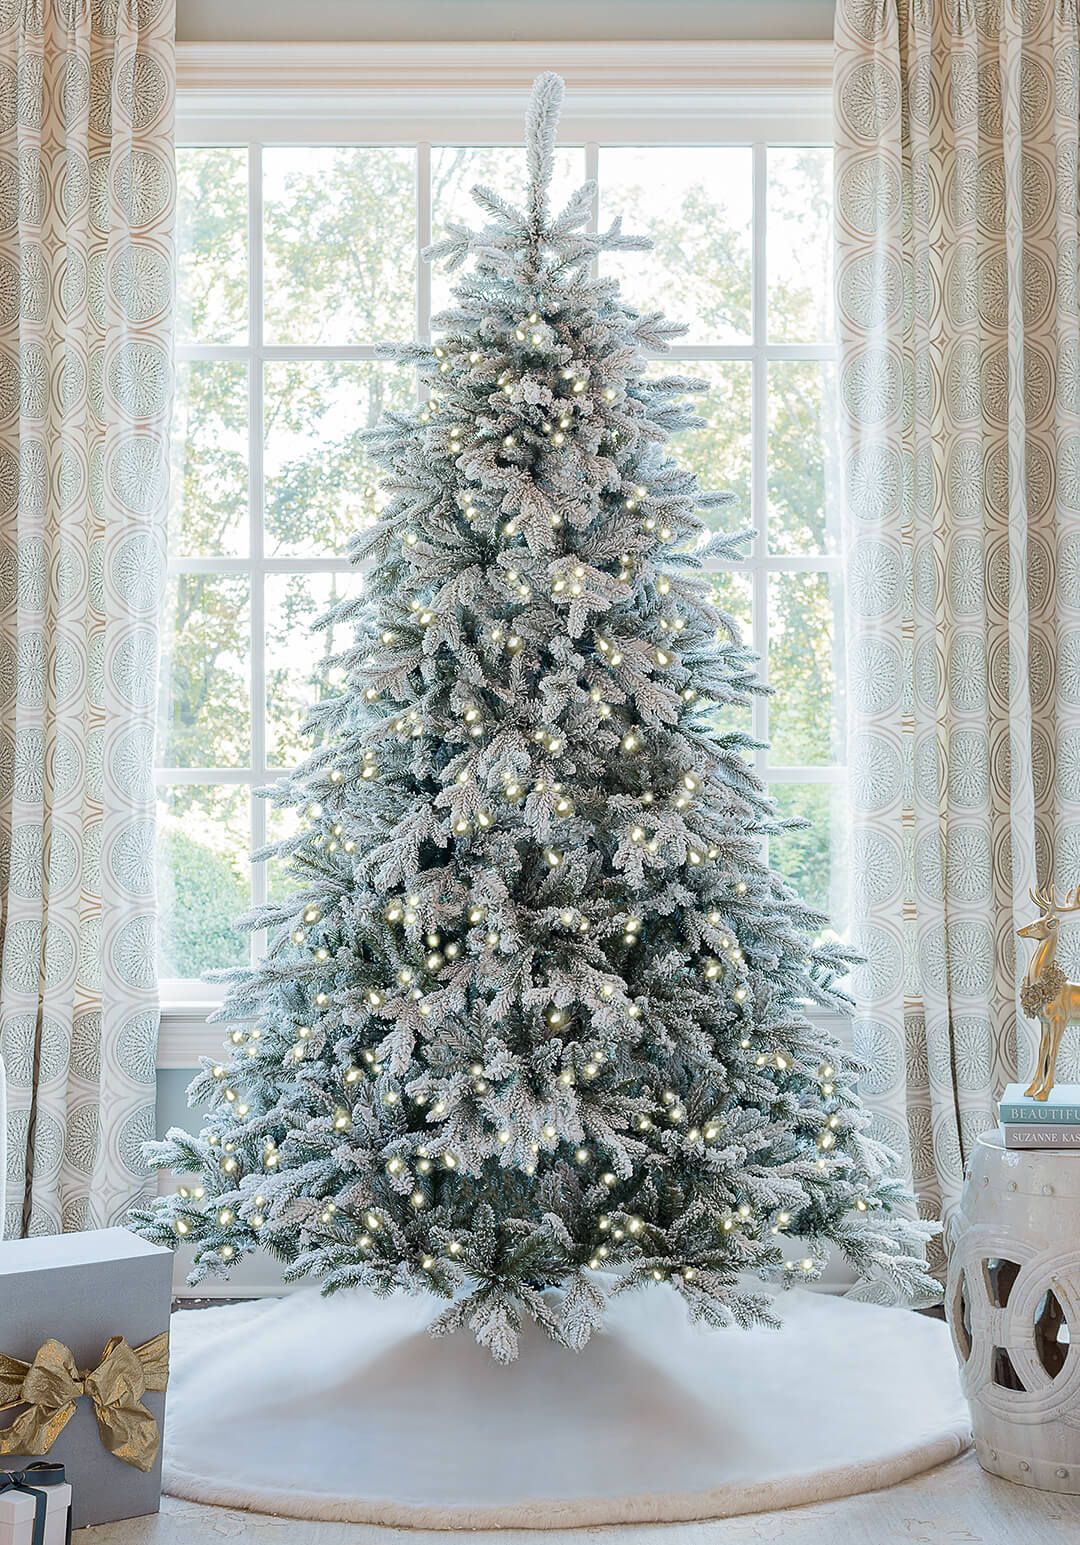 10' Queen Flock® Artificial Christmas Tree with 1300 Warm White LED Lights | King of Christmas